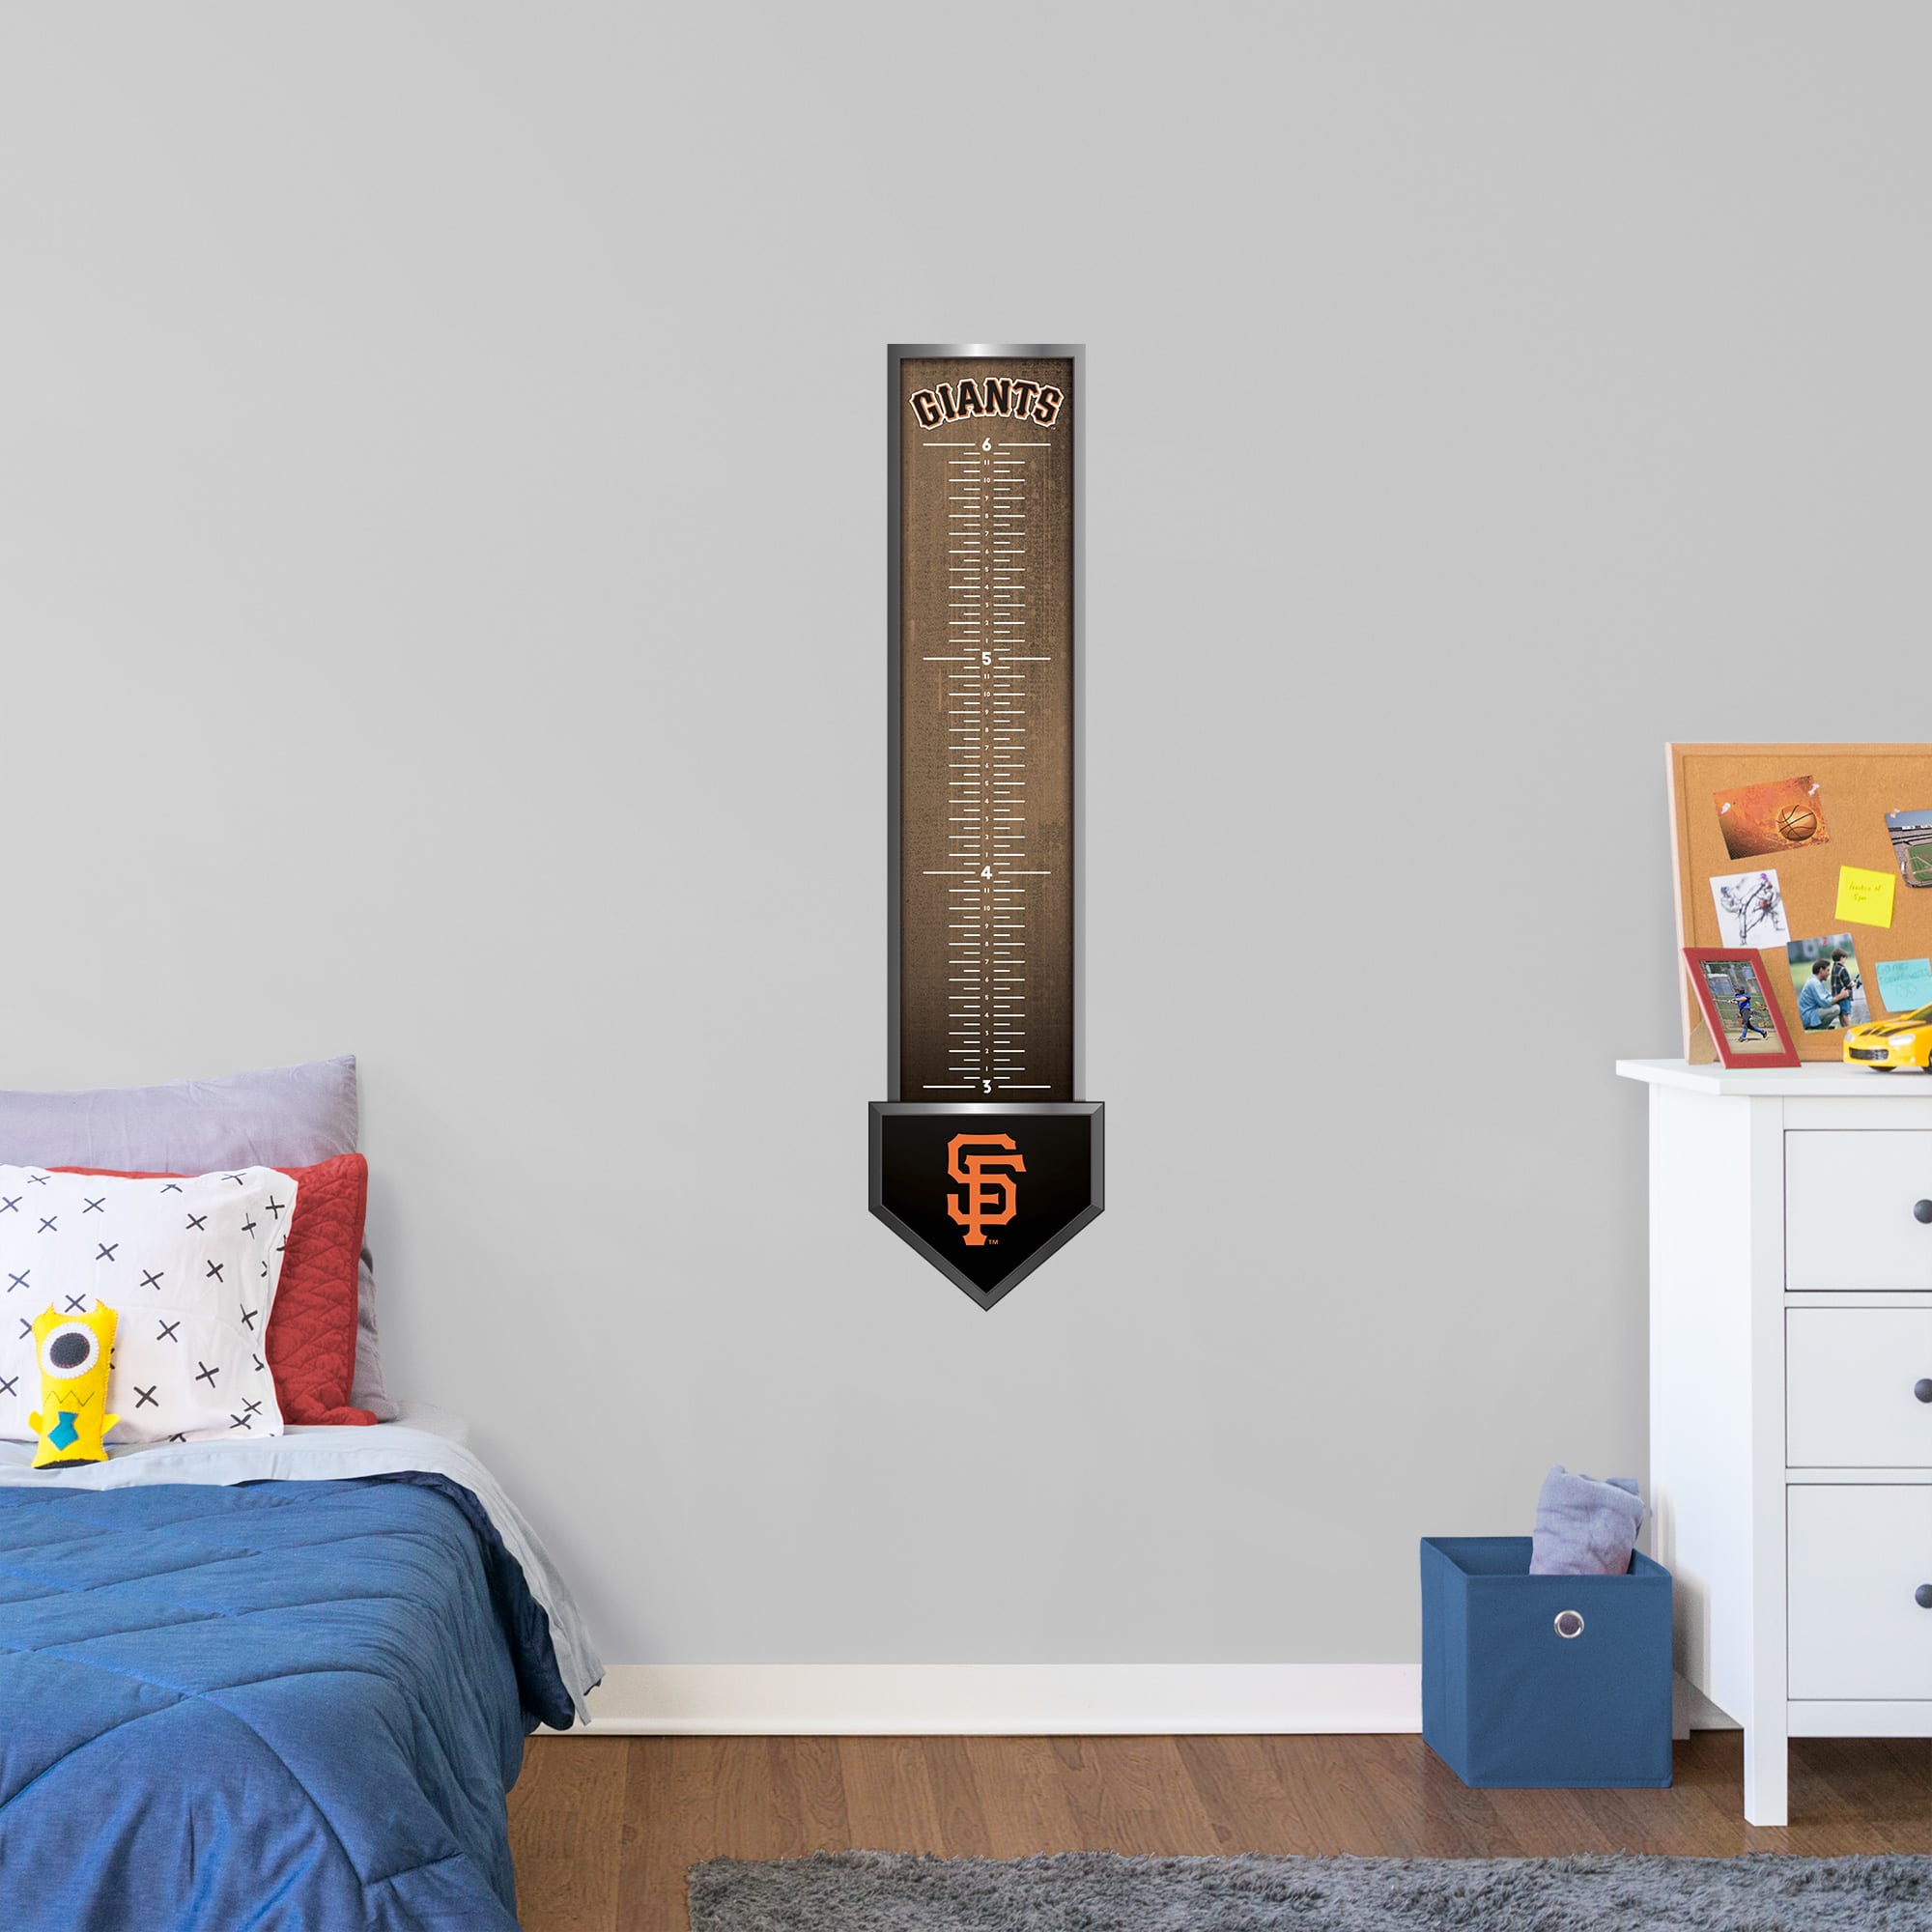 San Francisco Giants: Growth Chart - Officially Licensed MLB Removable Wall Graphic 13.0"W x 54.0"H by Fathead | Vinyl